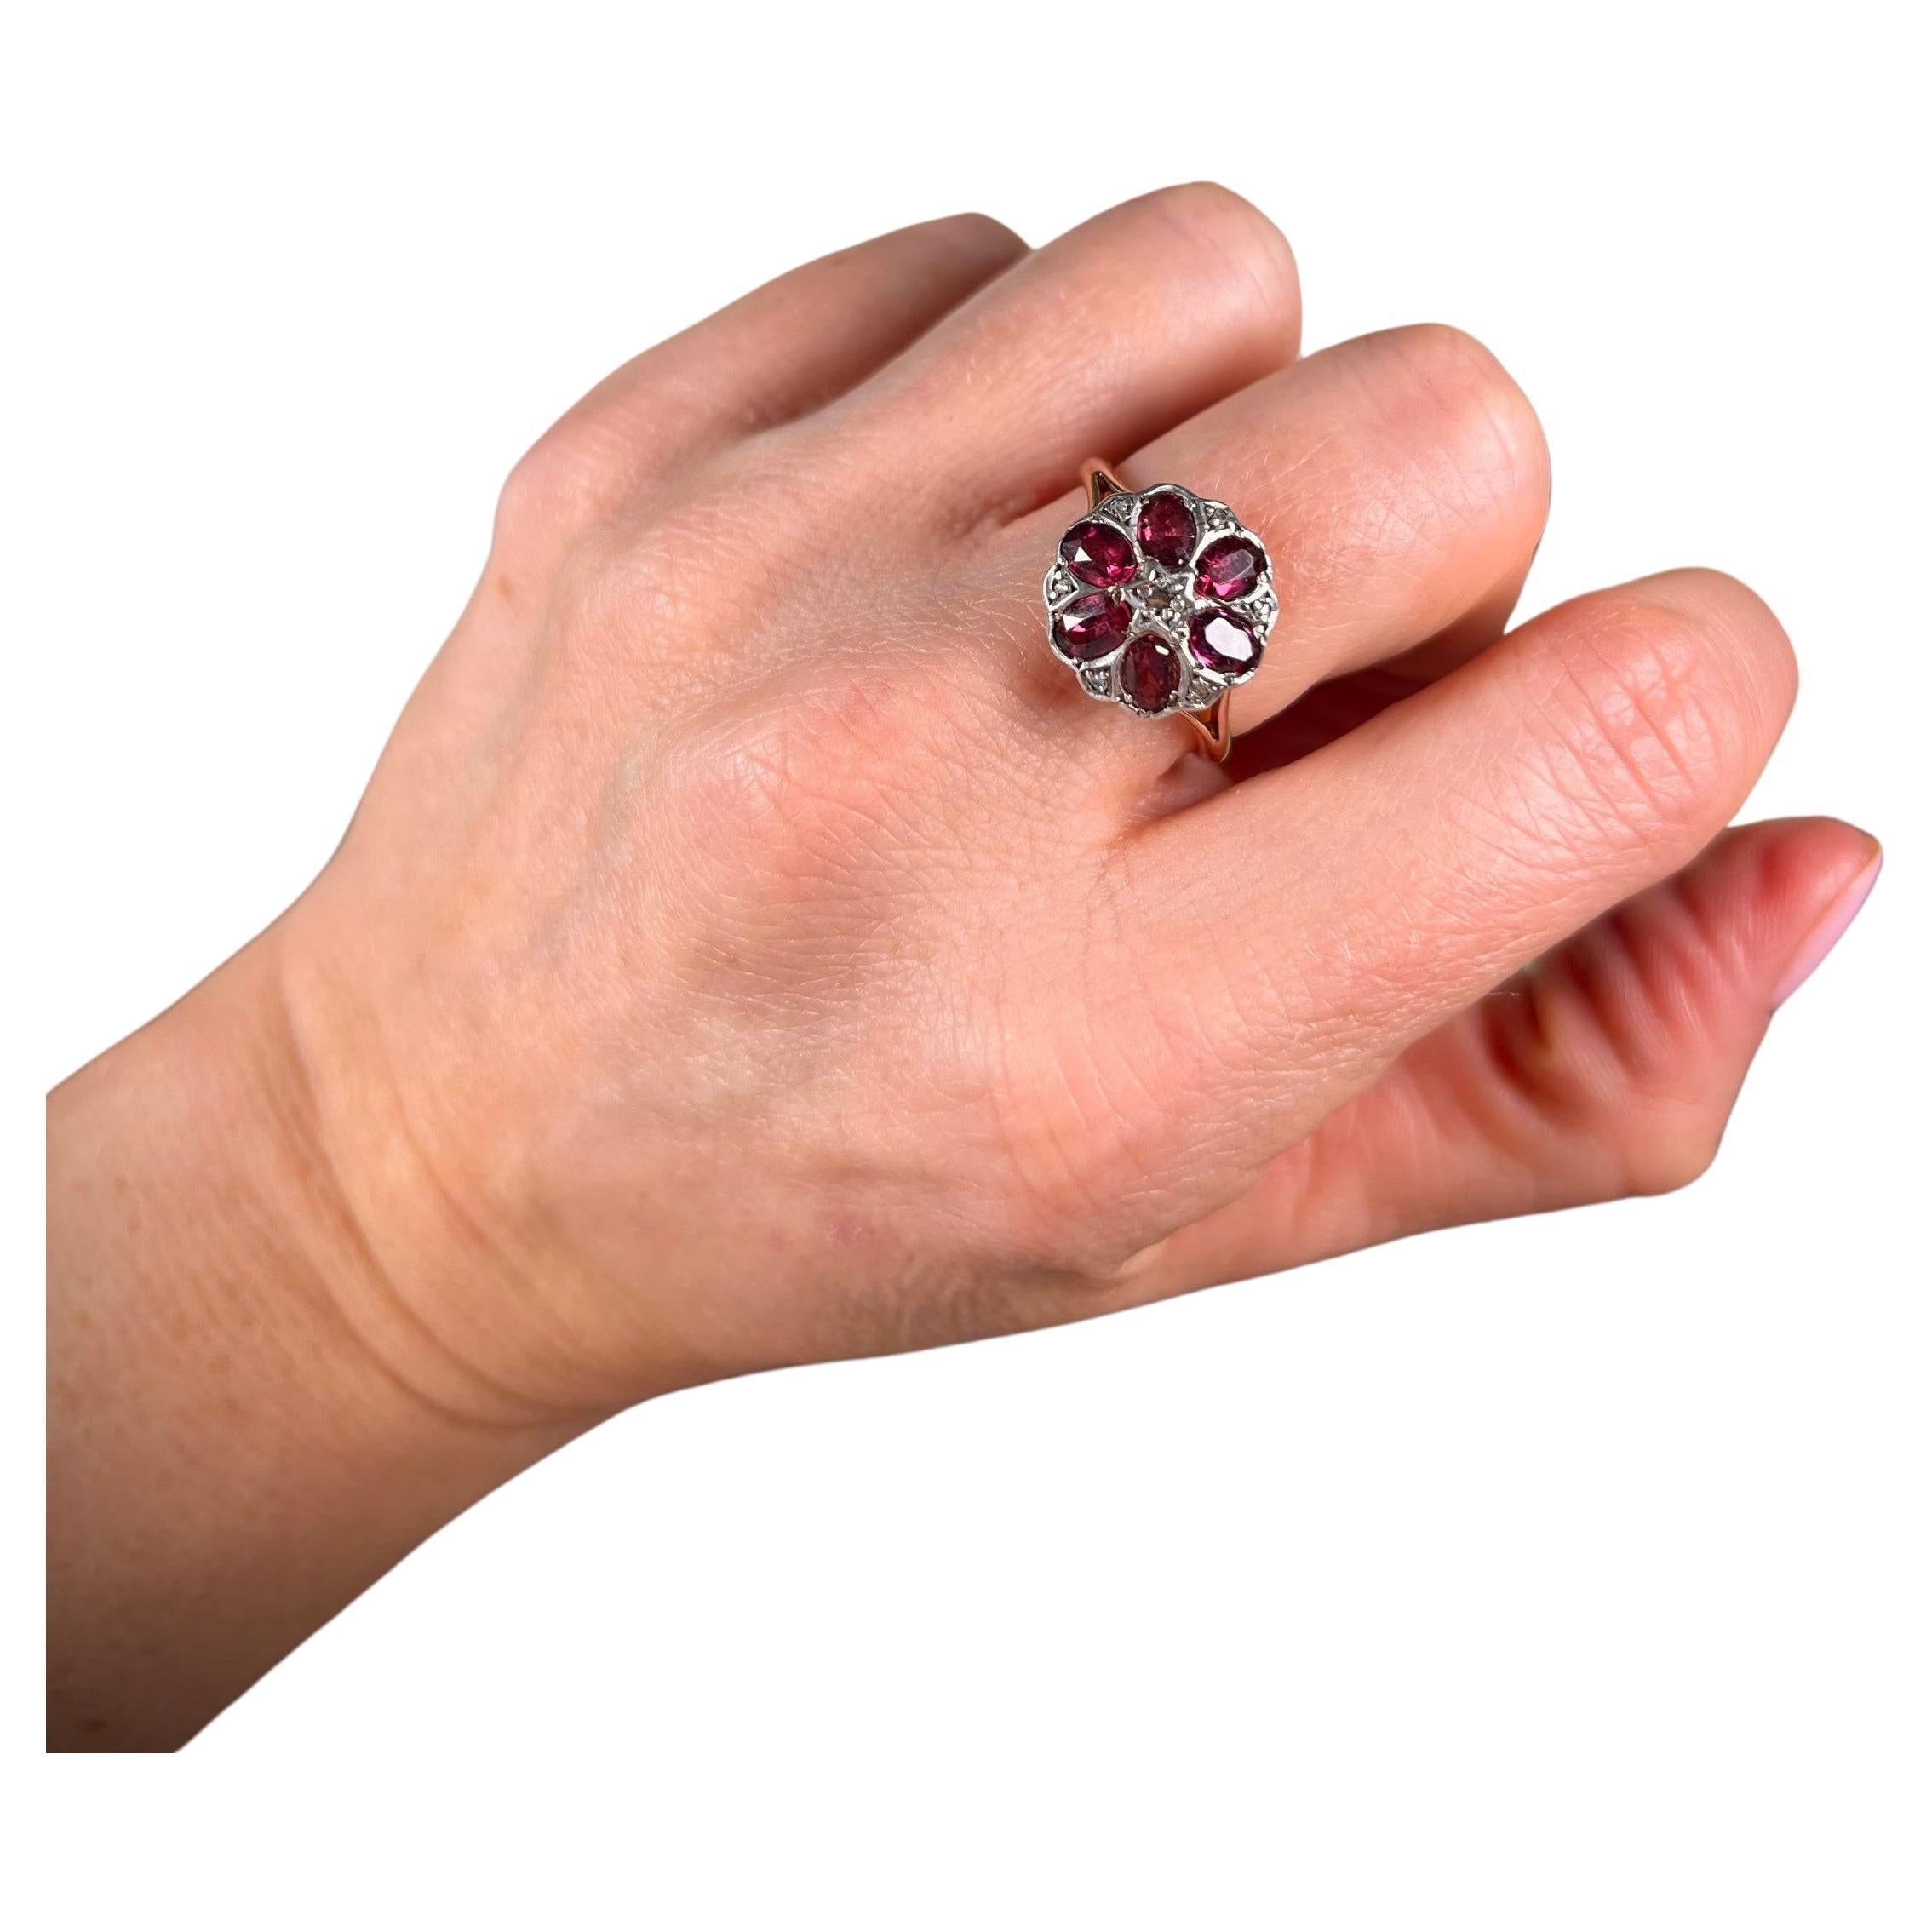 9ct Gold Garnet & Diamond Daisy Cluster Ring Set with Faceted Garnet Petals  